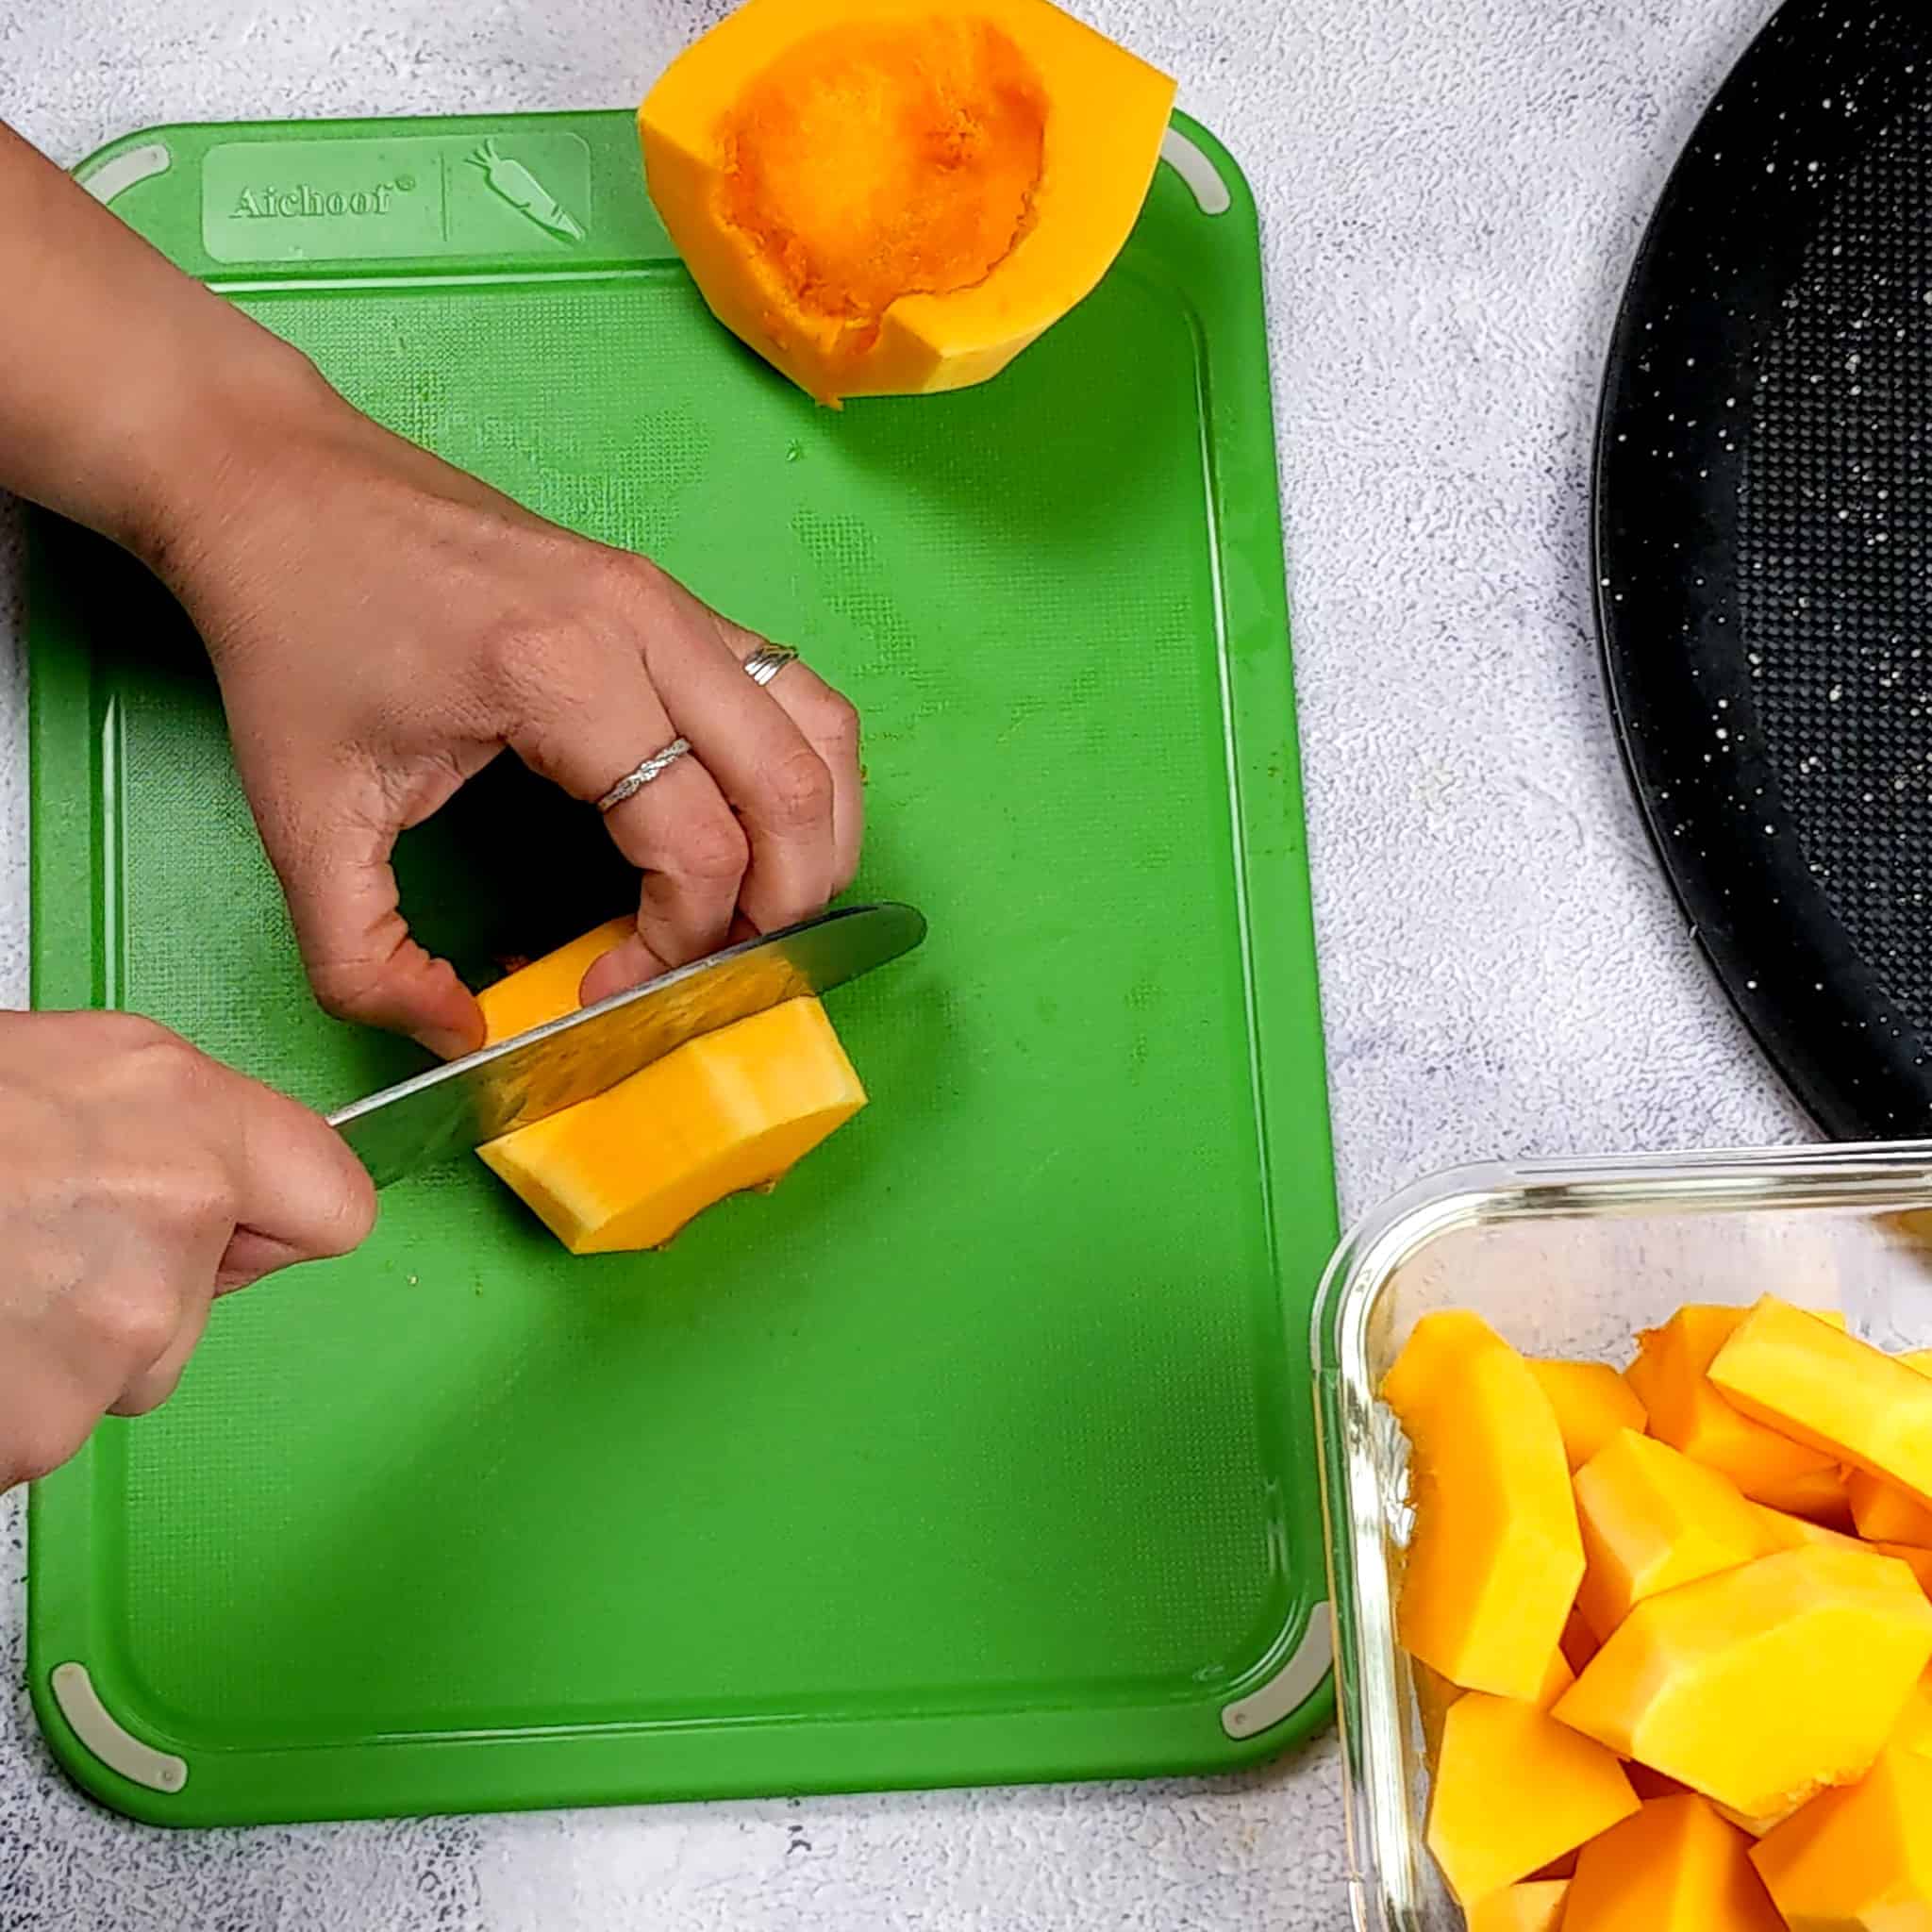 a peeled butternut squash being cut into thick slices on a small color coded cutting board with a knife next to a container of already sliced pieces.